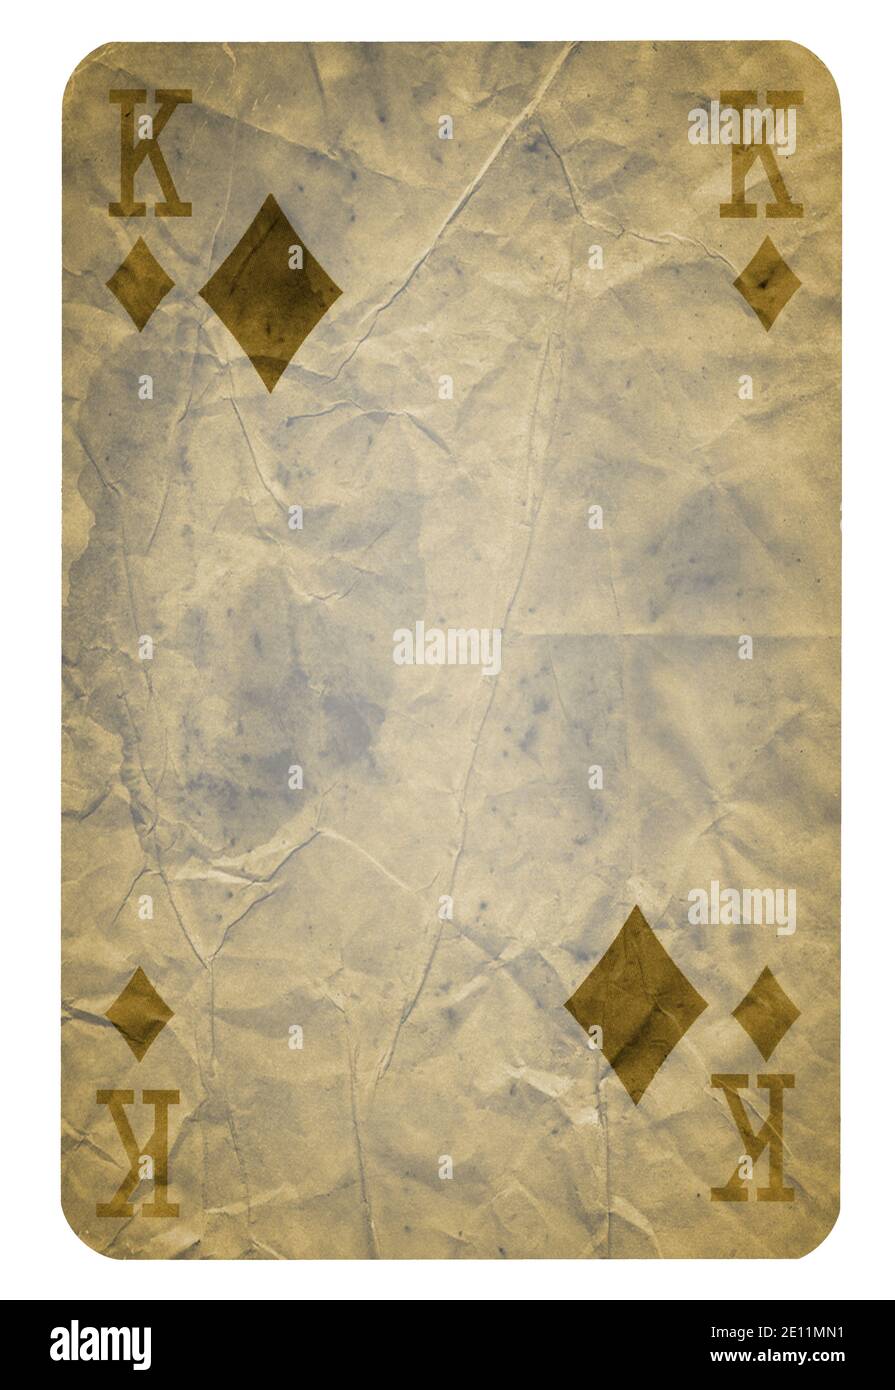 Vintage playing cards of Diamond suit, isolated on white background - High quality XXLIsolated Stock Photo